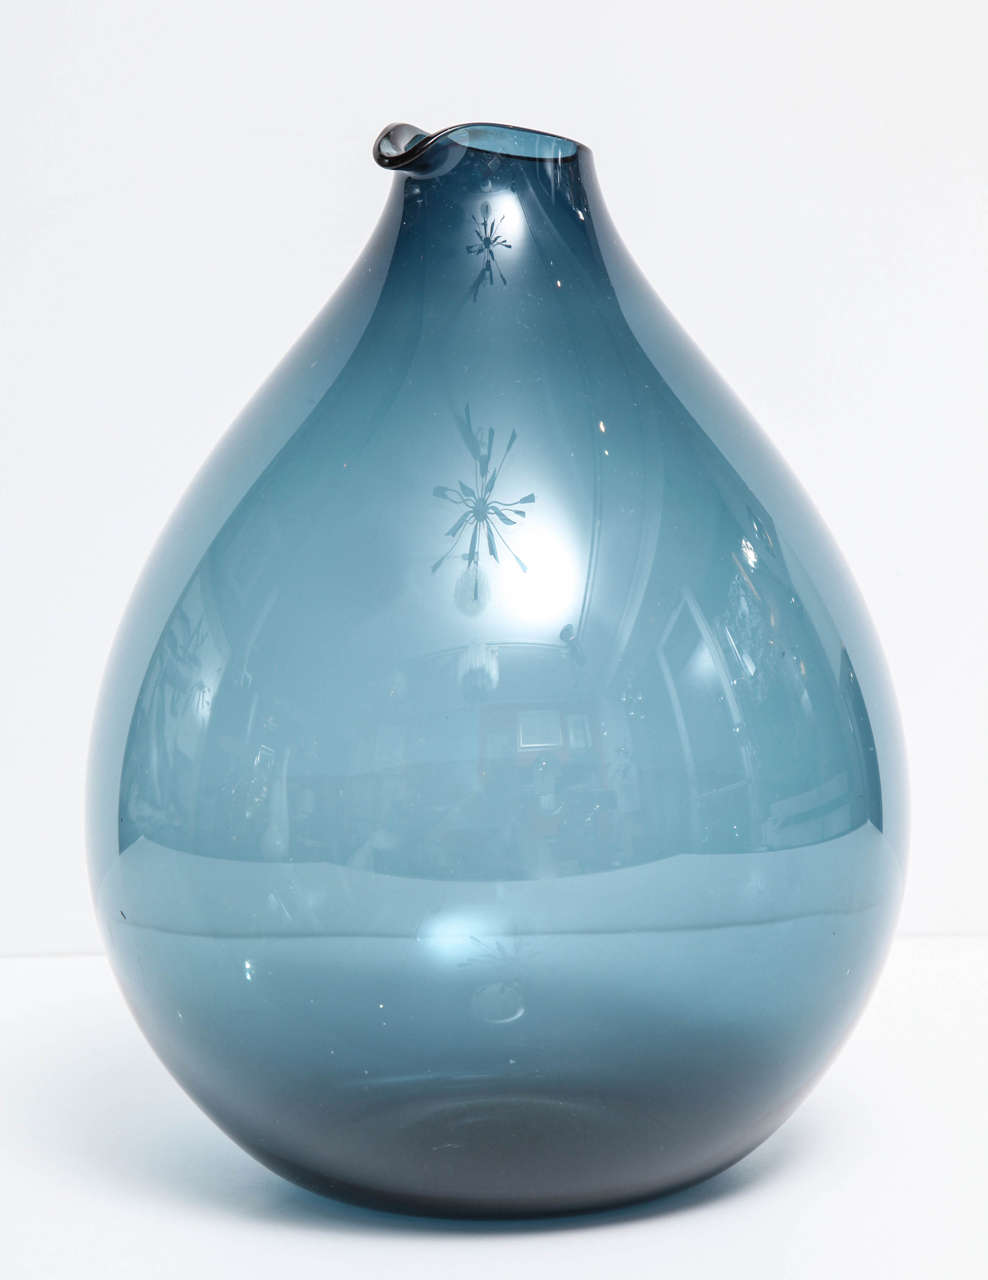 Beautiful designed, Mid-Century Modern vase by Timo Sarpaneva, Finland, circa 1960.
Timo Sarpaneva was an influential Finnish designer, sculptor and educator best known in the art world for innovative work in glass, which often merged attributes of